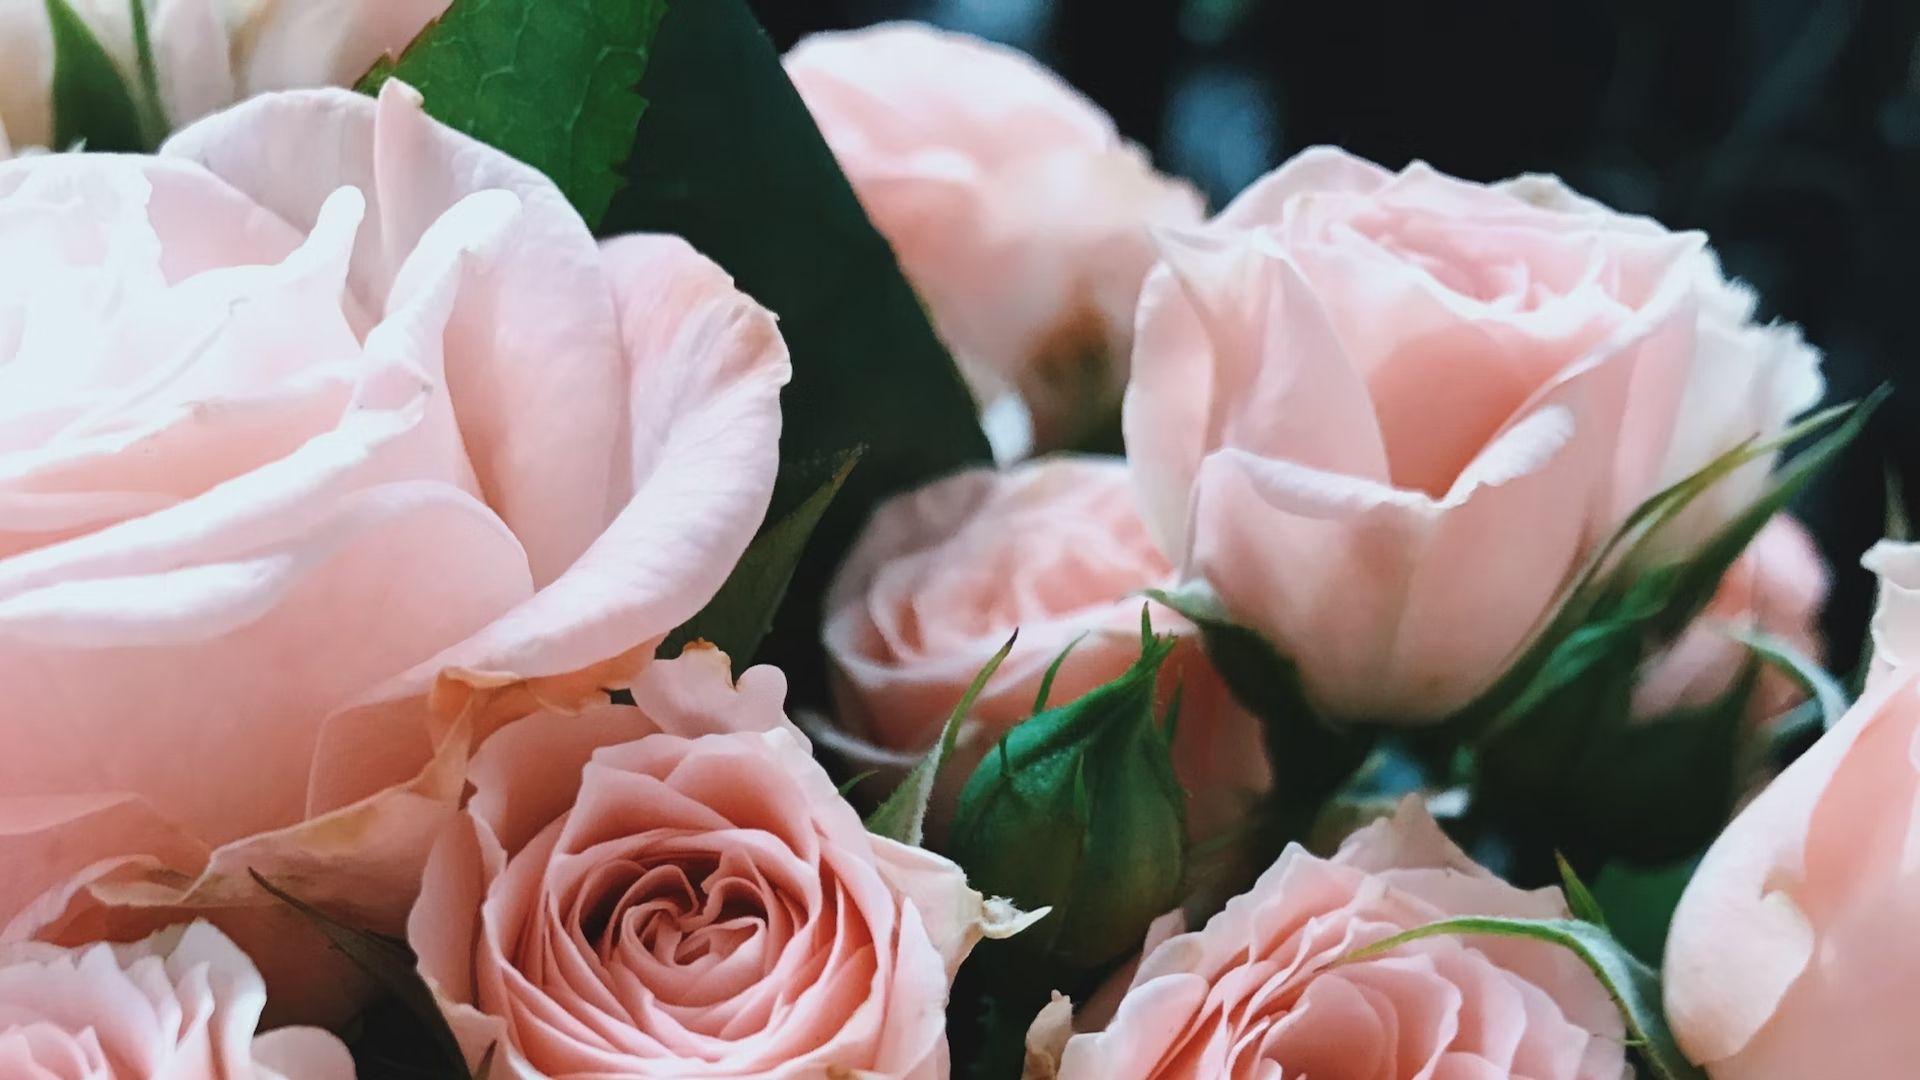 Dutch Flower Group has become a shareholder of Nini Herburg Roses